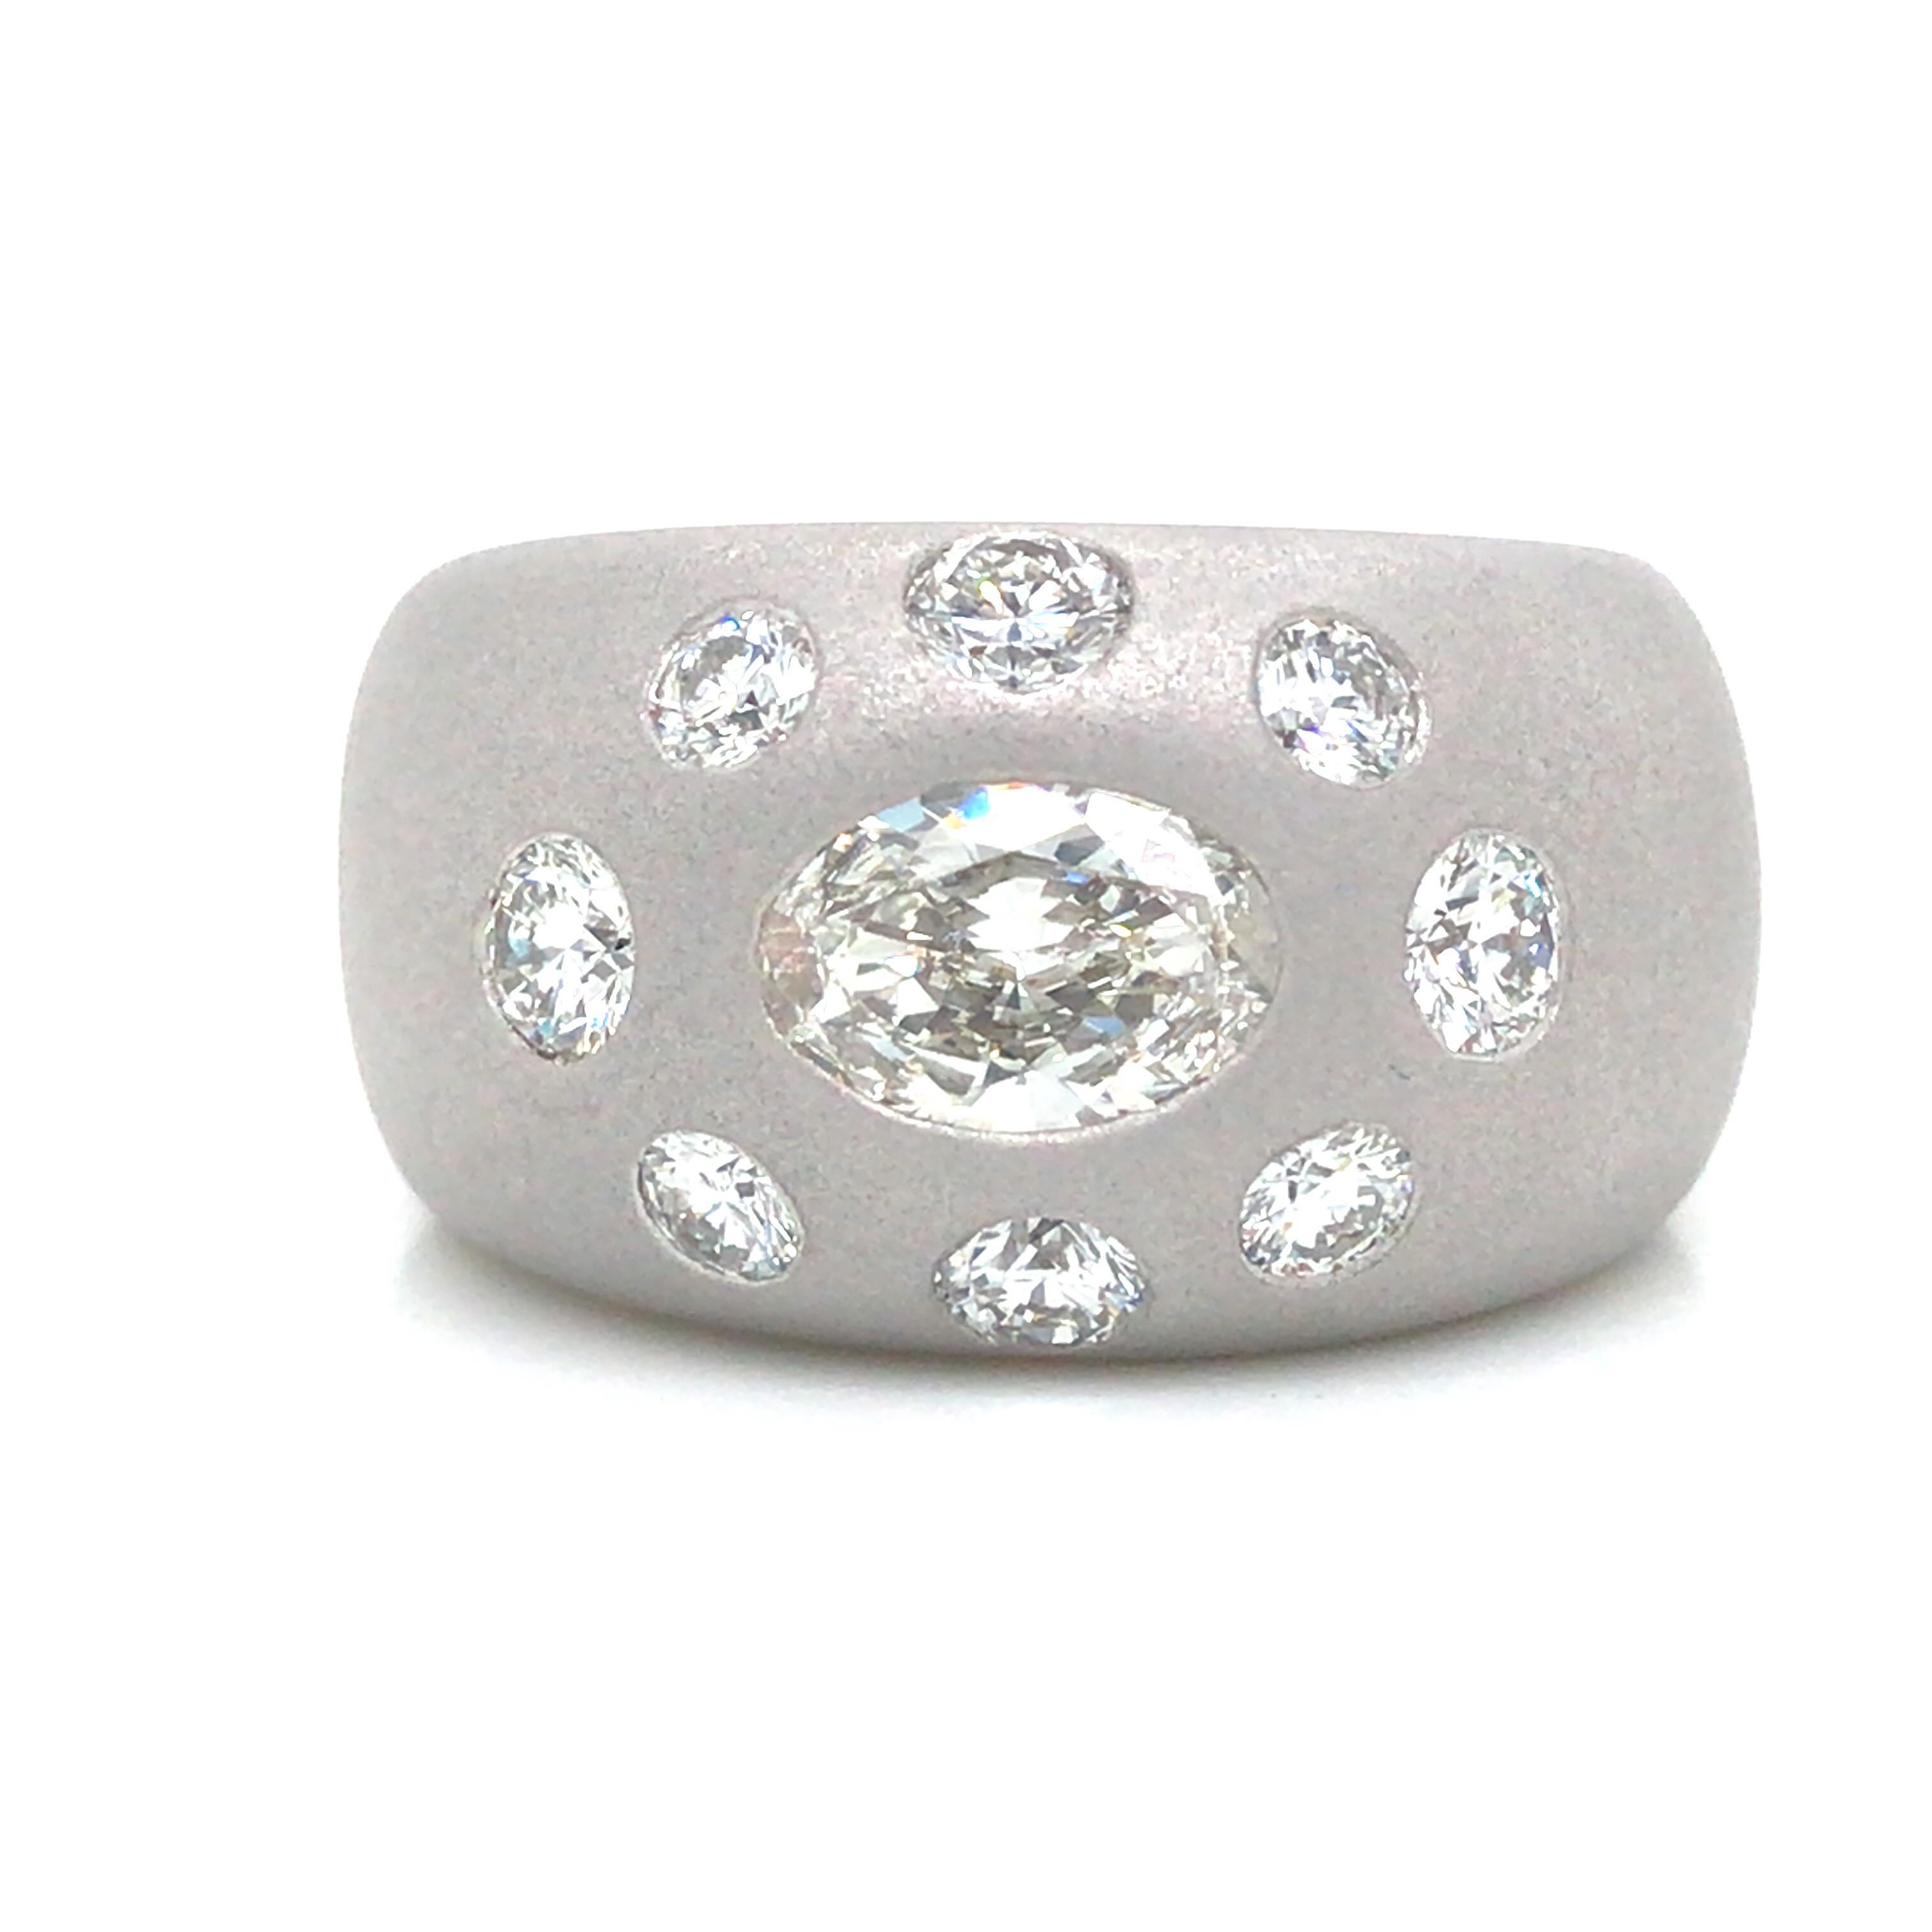 Diamond Gents Ring in 14K White Gold.  (1) Oval Diamond weighing 1.50 carats and (8) Round Brilliant Cut Diamonds weighing 1.50 carats F-H in color and VS1 in clarity are expertly set.  The Ring measures 1/2 inch in width.  Ring size 11.  29.5